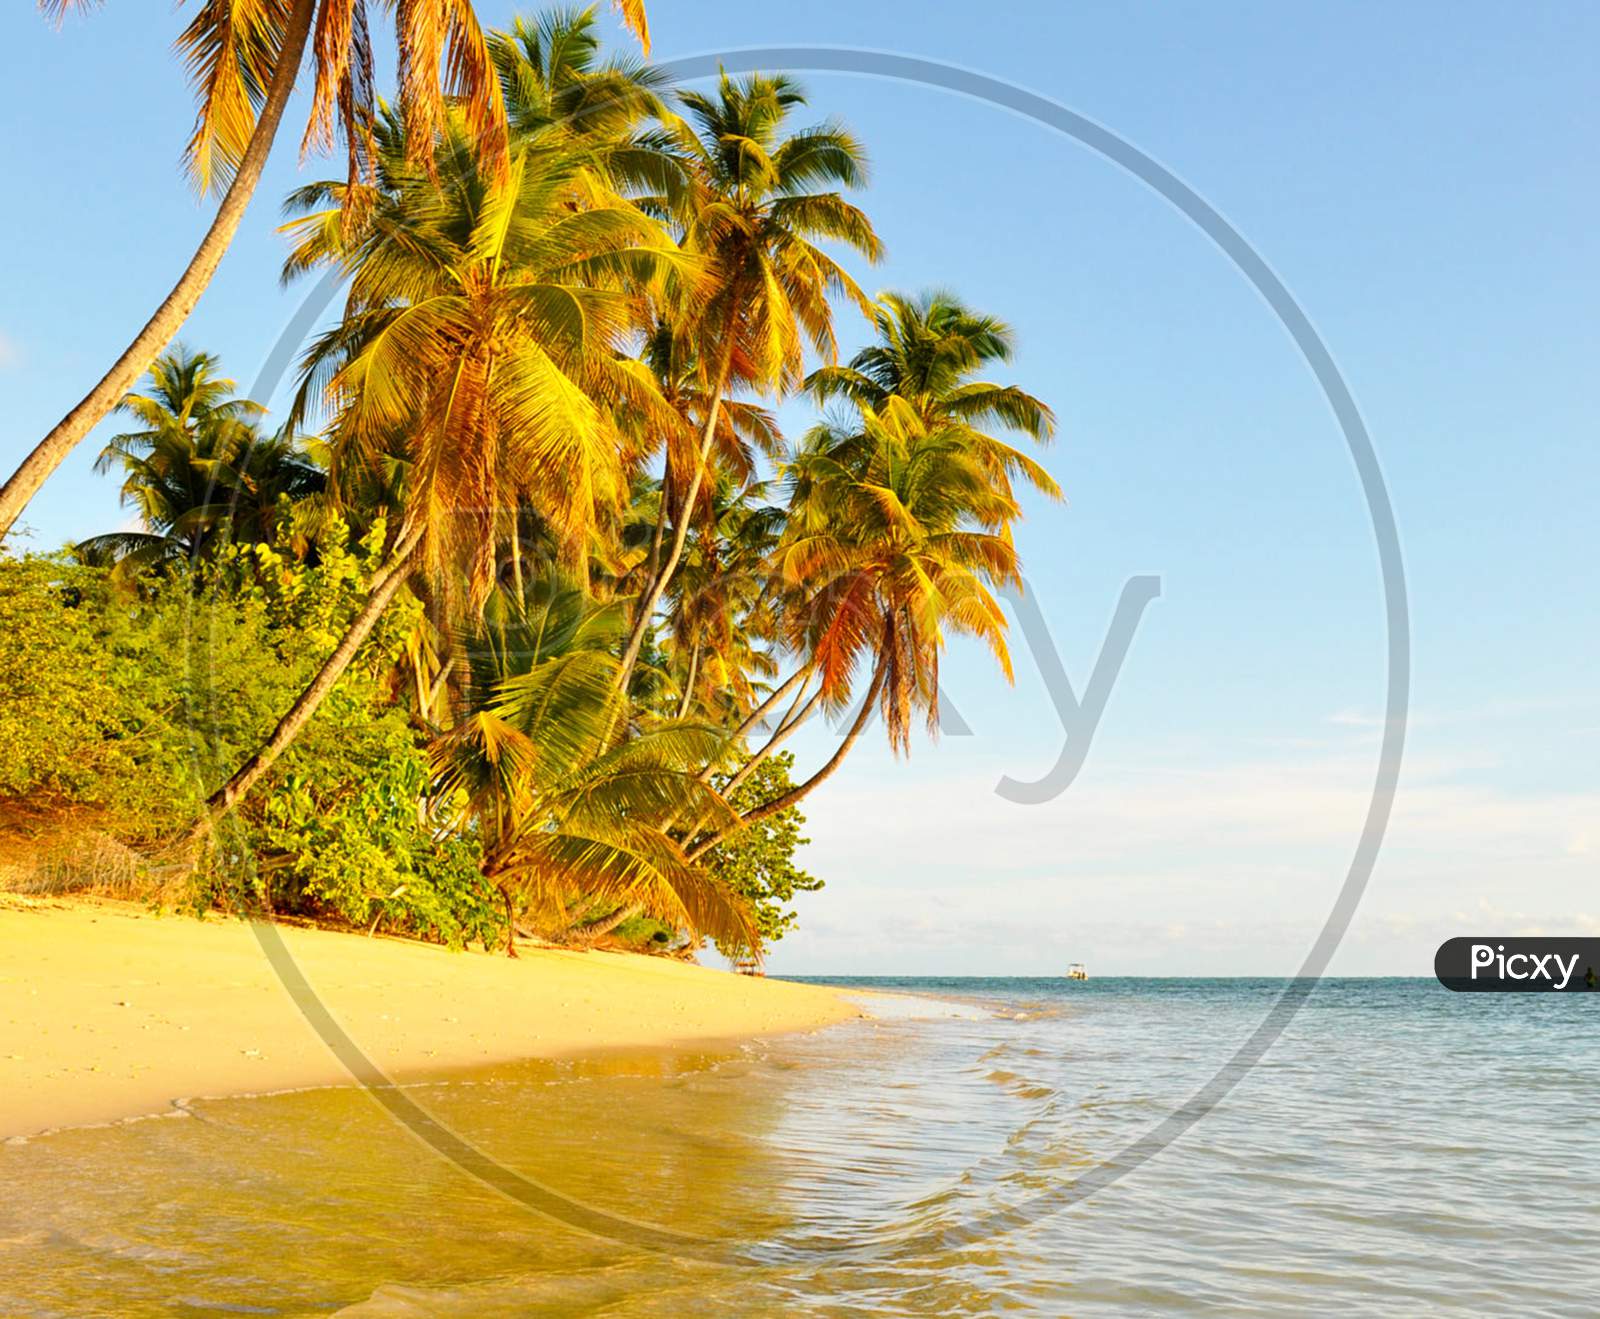 Beautiful pictures of Trinidad and Tobago